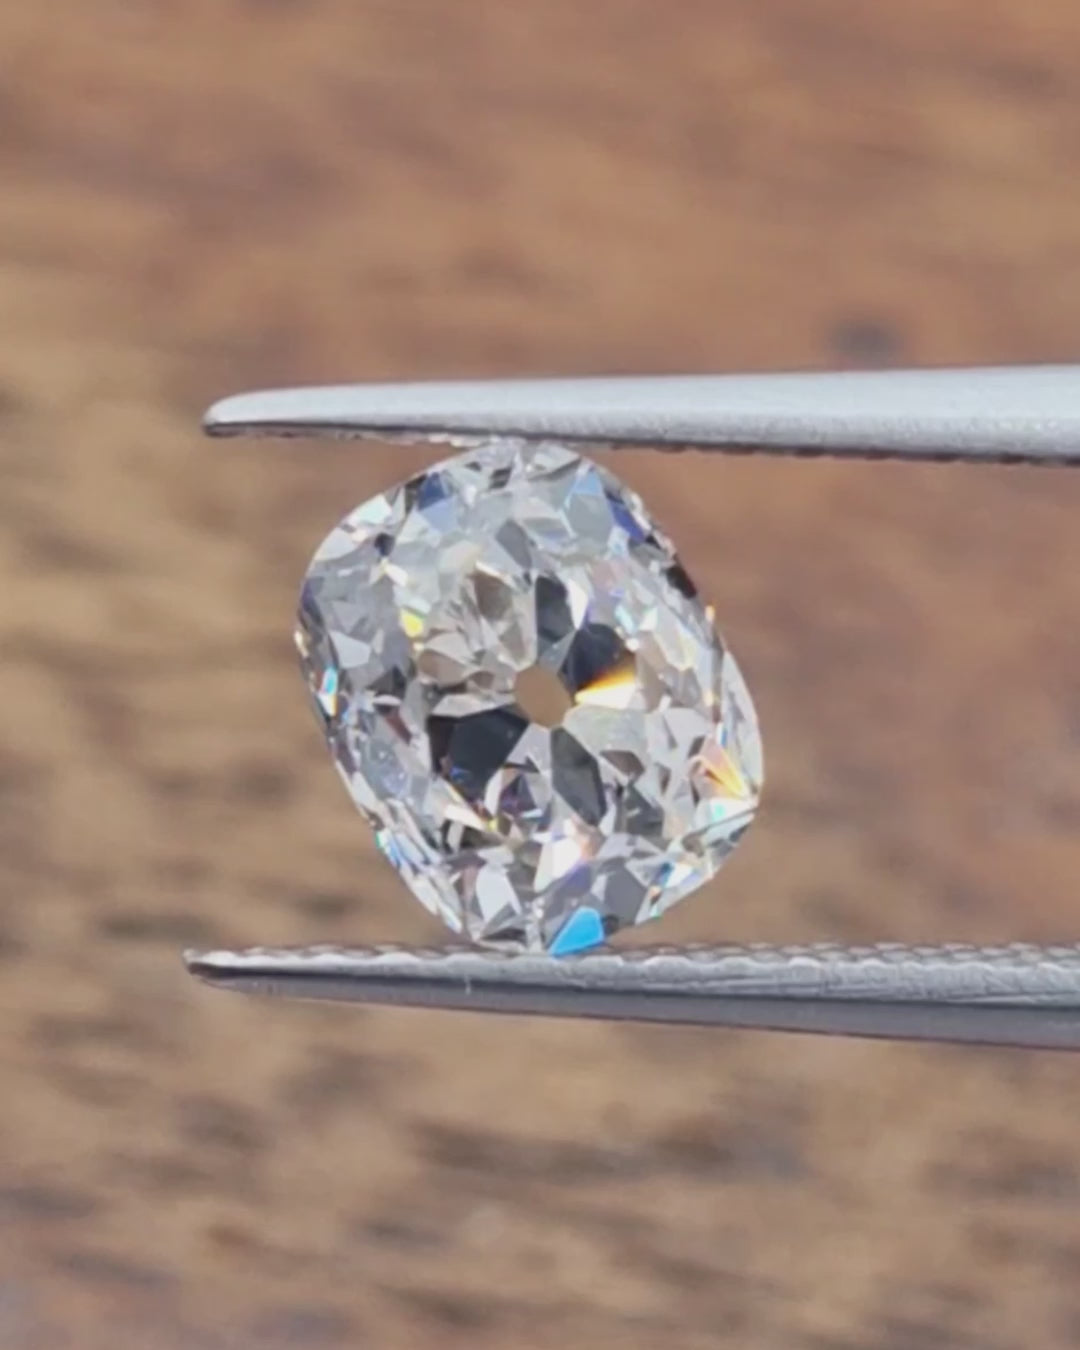 WE FIND YOUR OWN ANTIQUE DIAMOND